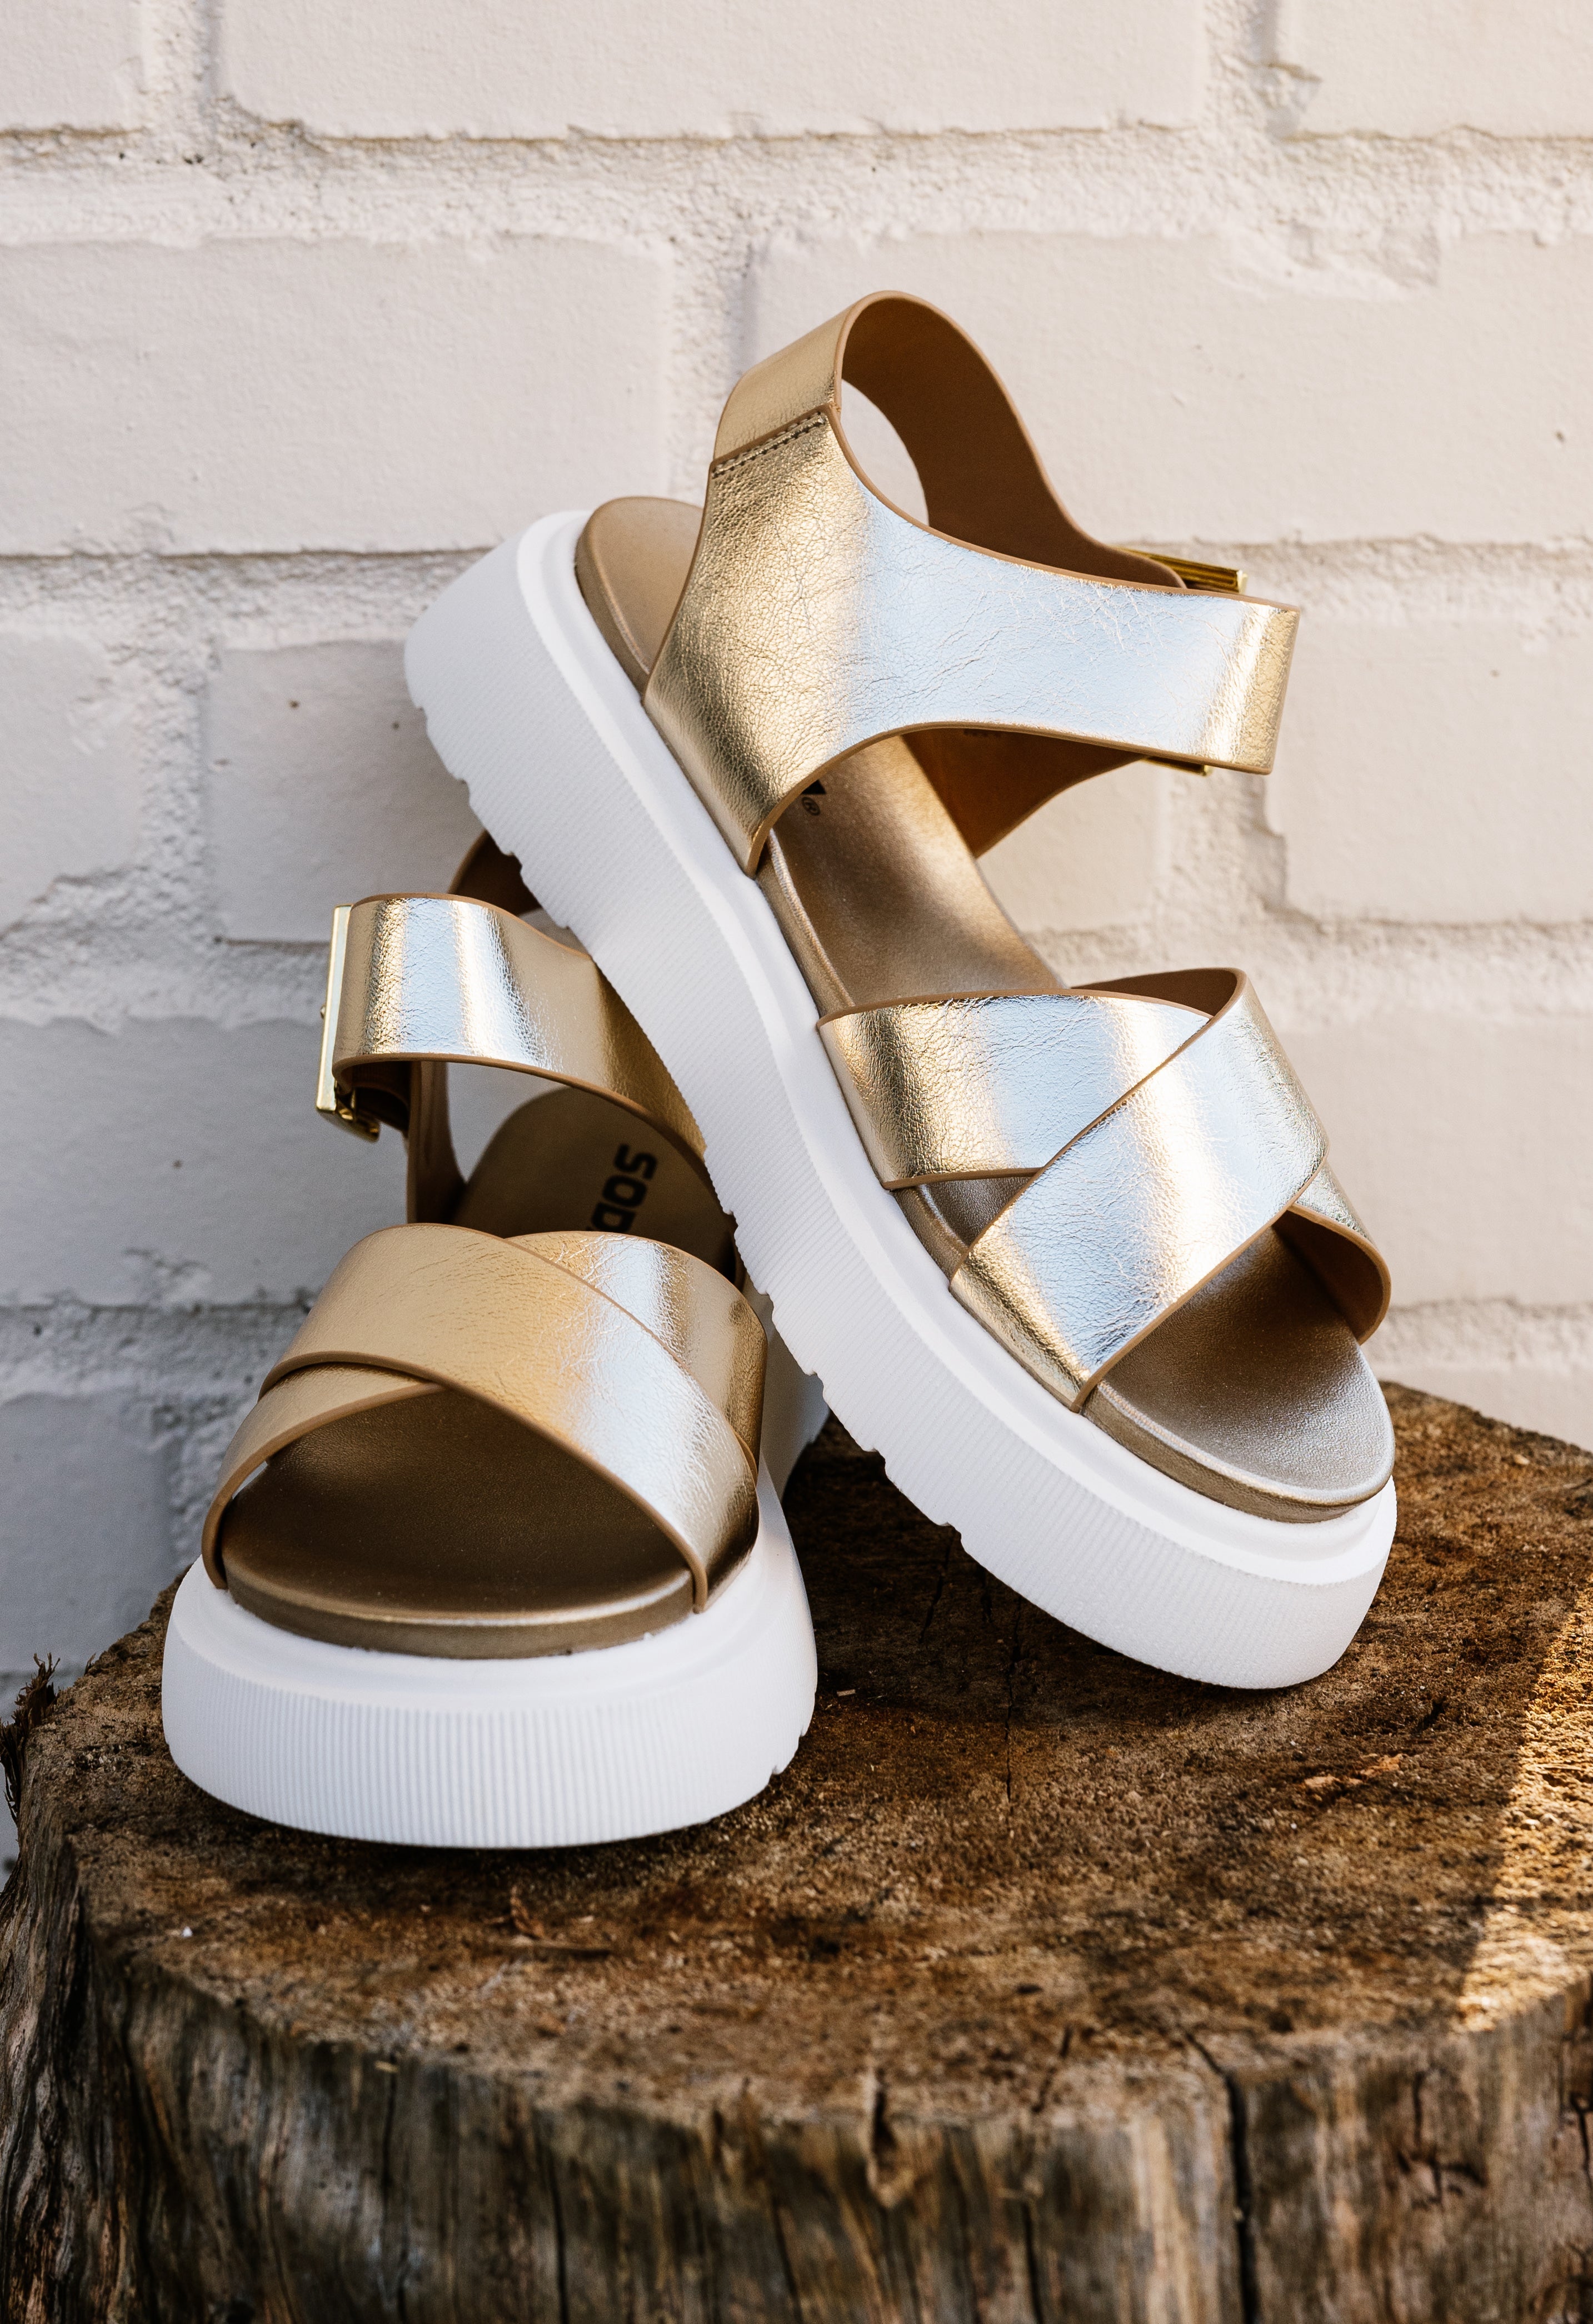 Walkabout Sandals - GOLD - willows clothing Sandals